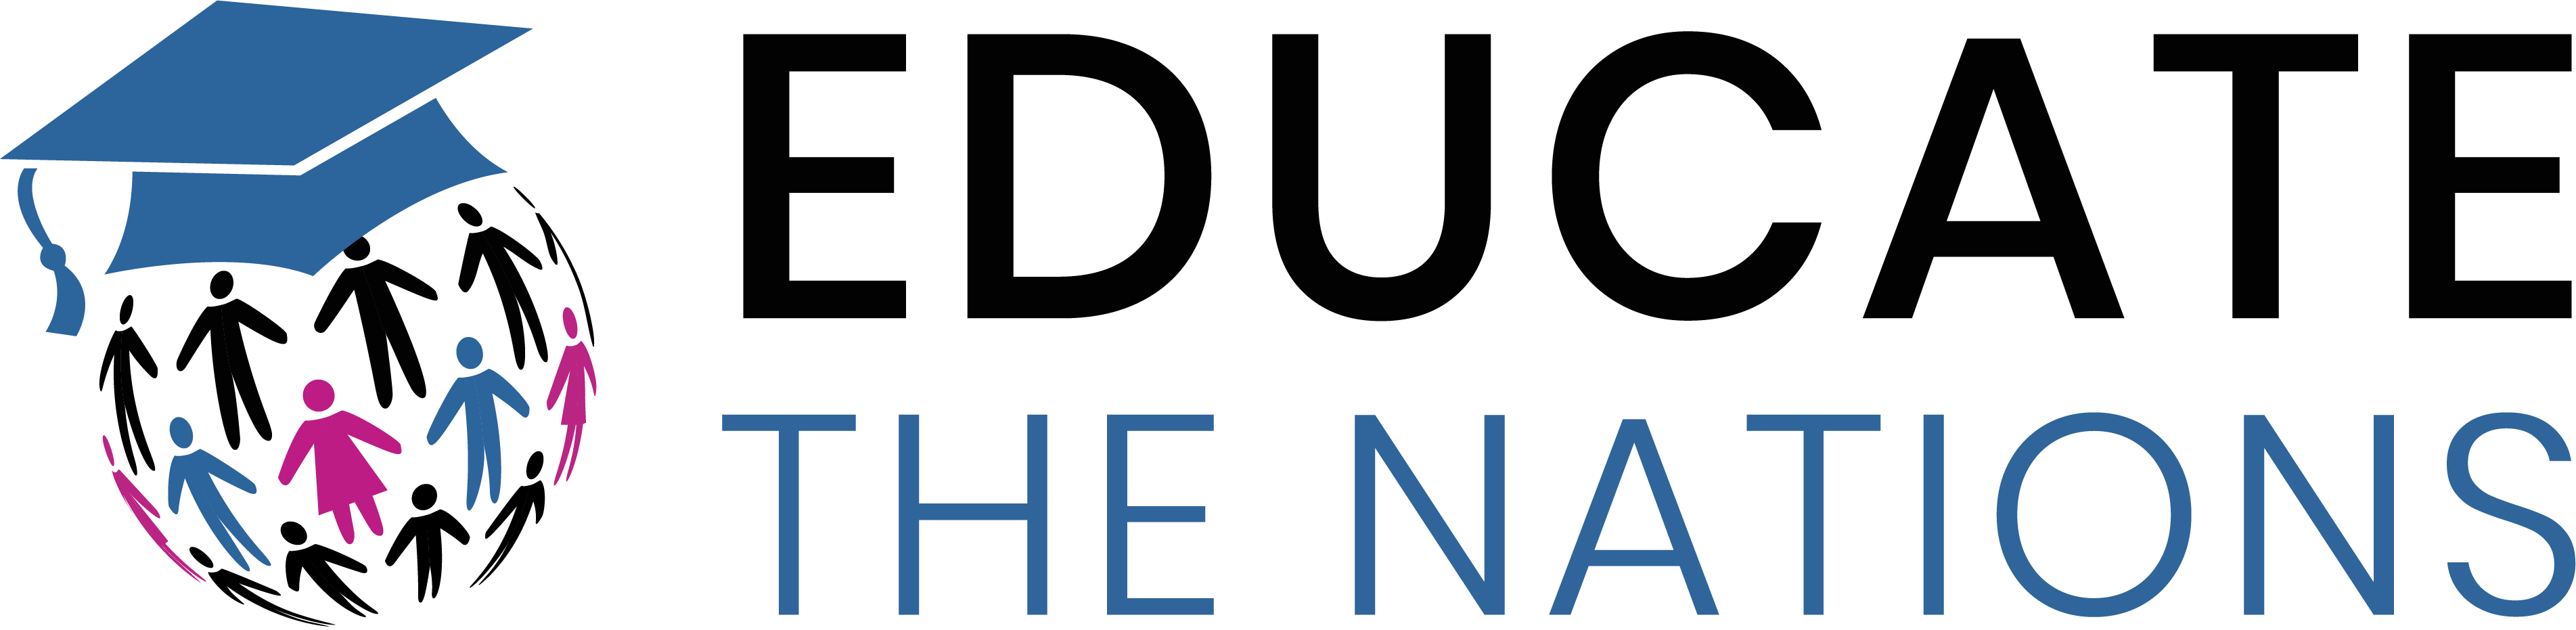 Educate the Nations, Inc. logo